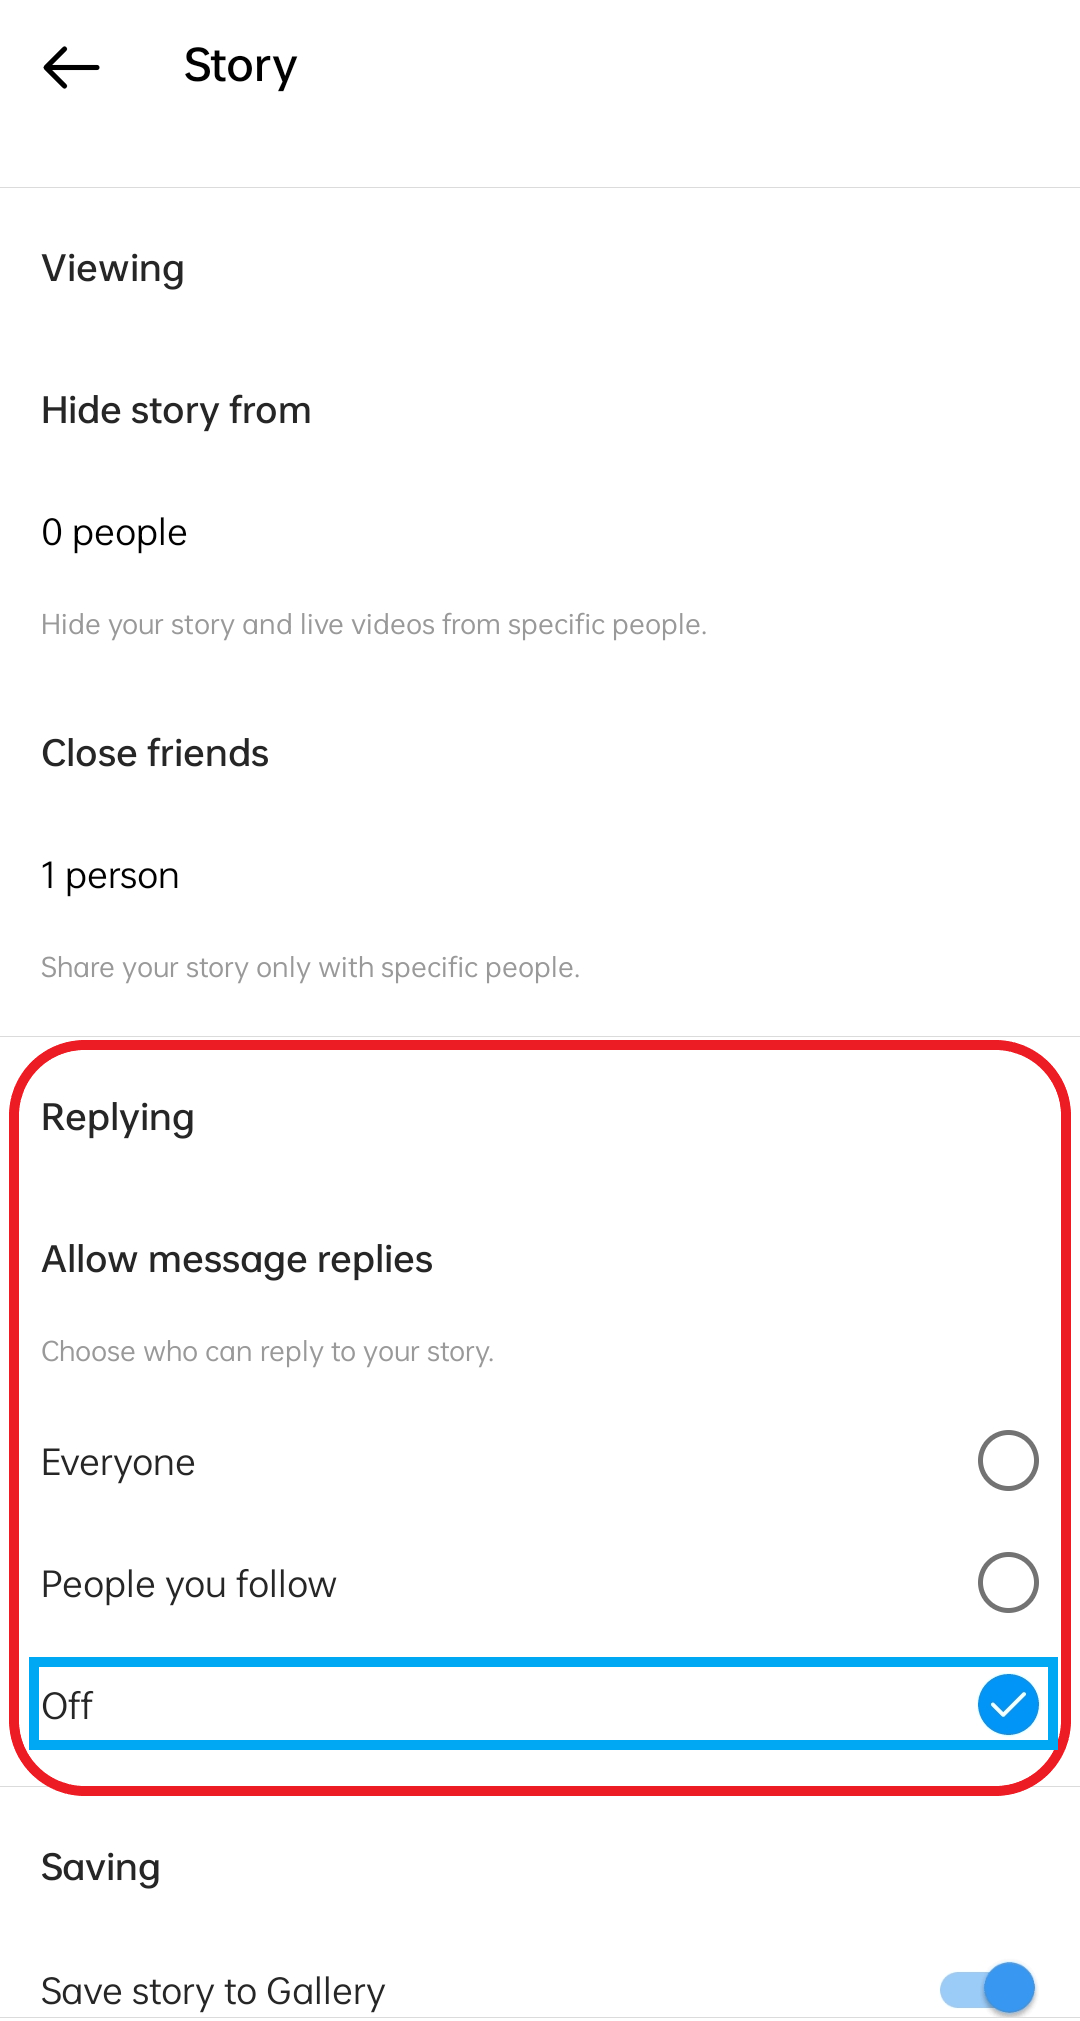 How to Stop Users From Replying to Your Stories